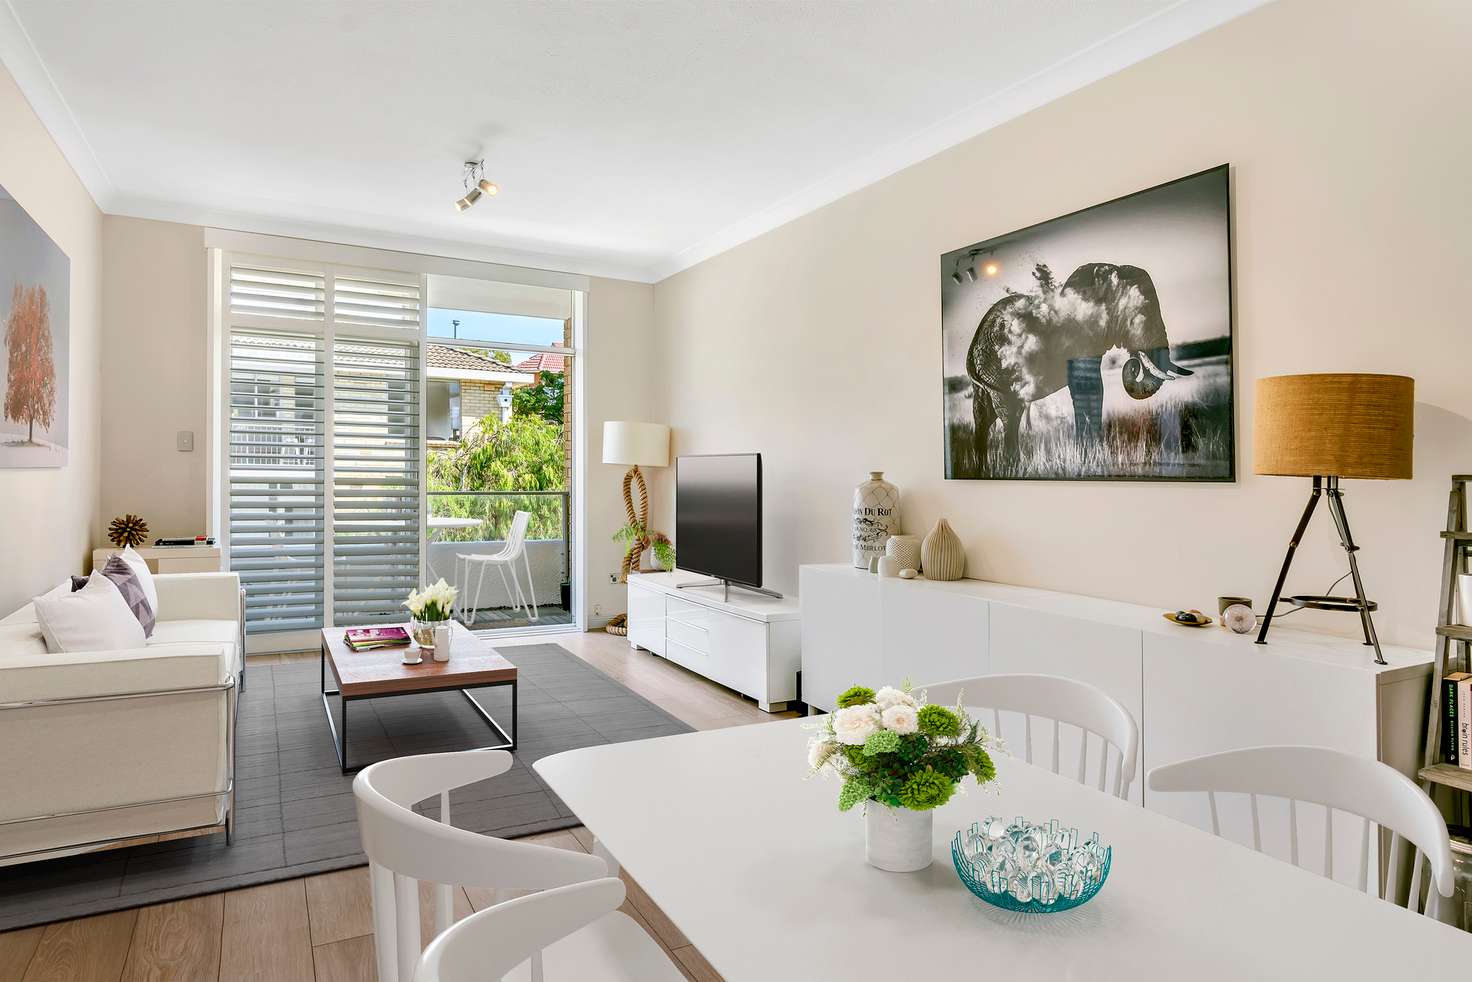 Main view of Homely apartment listing, 12/2-4 Miller Street, Bondi NSW 2026